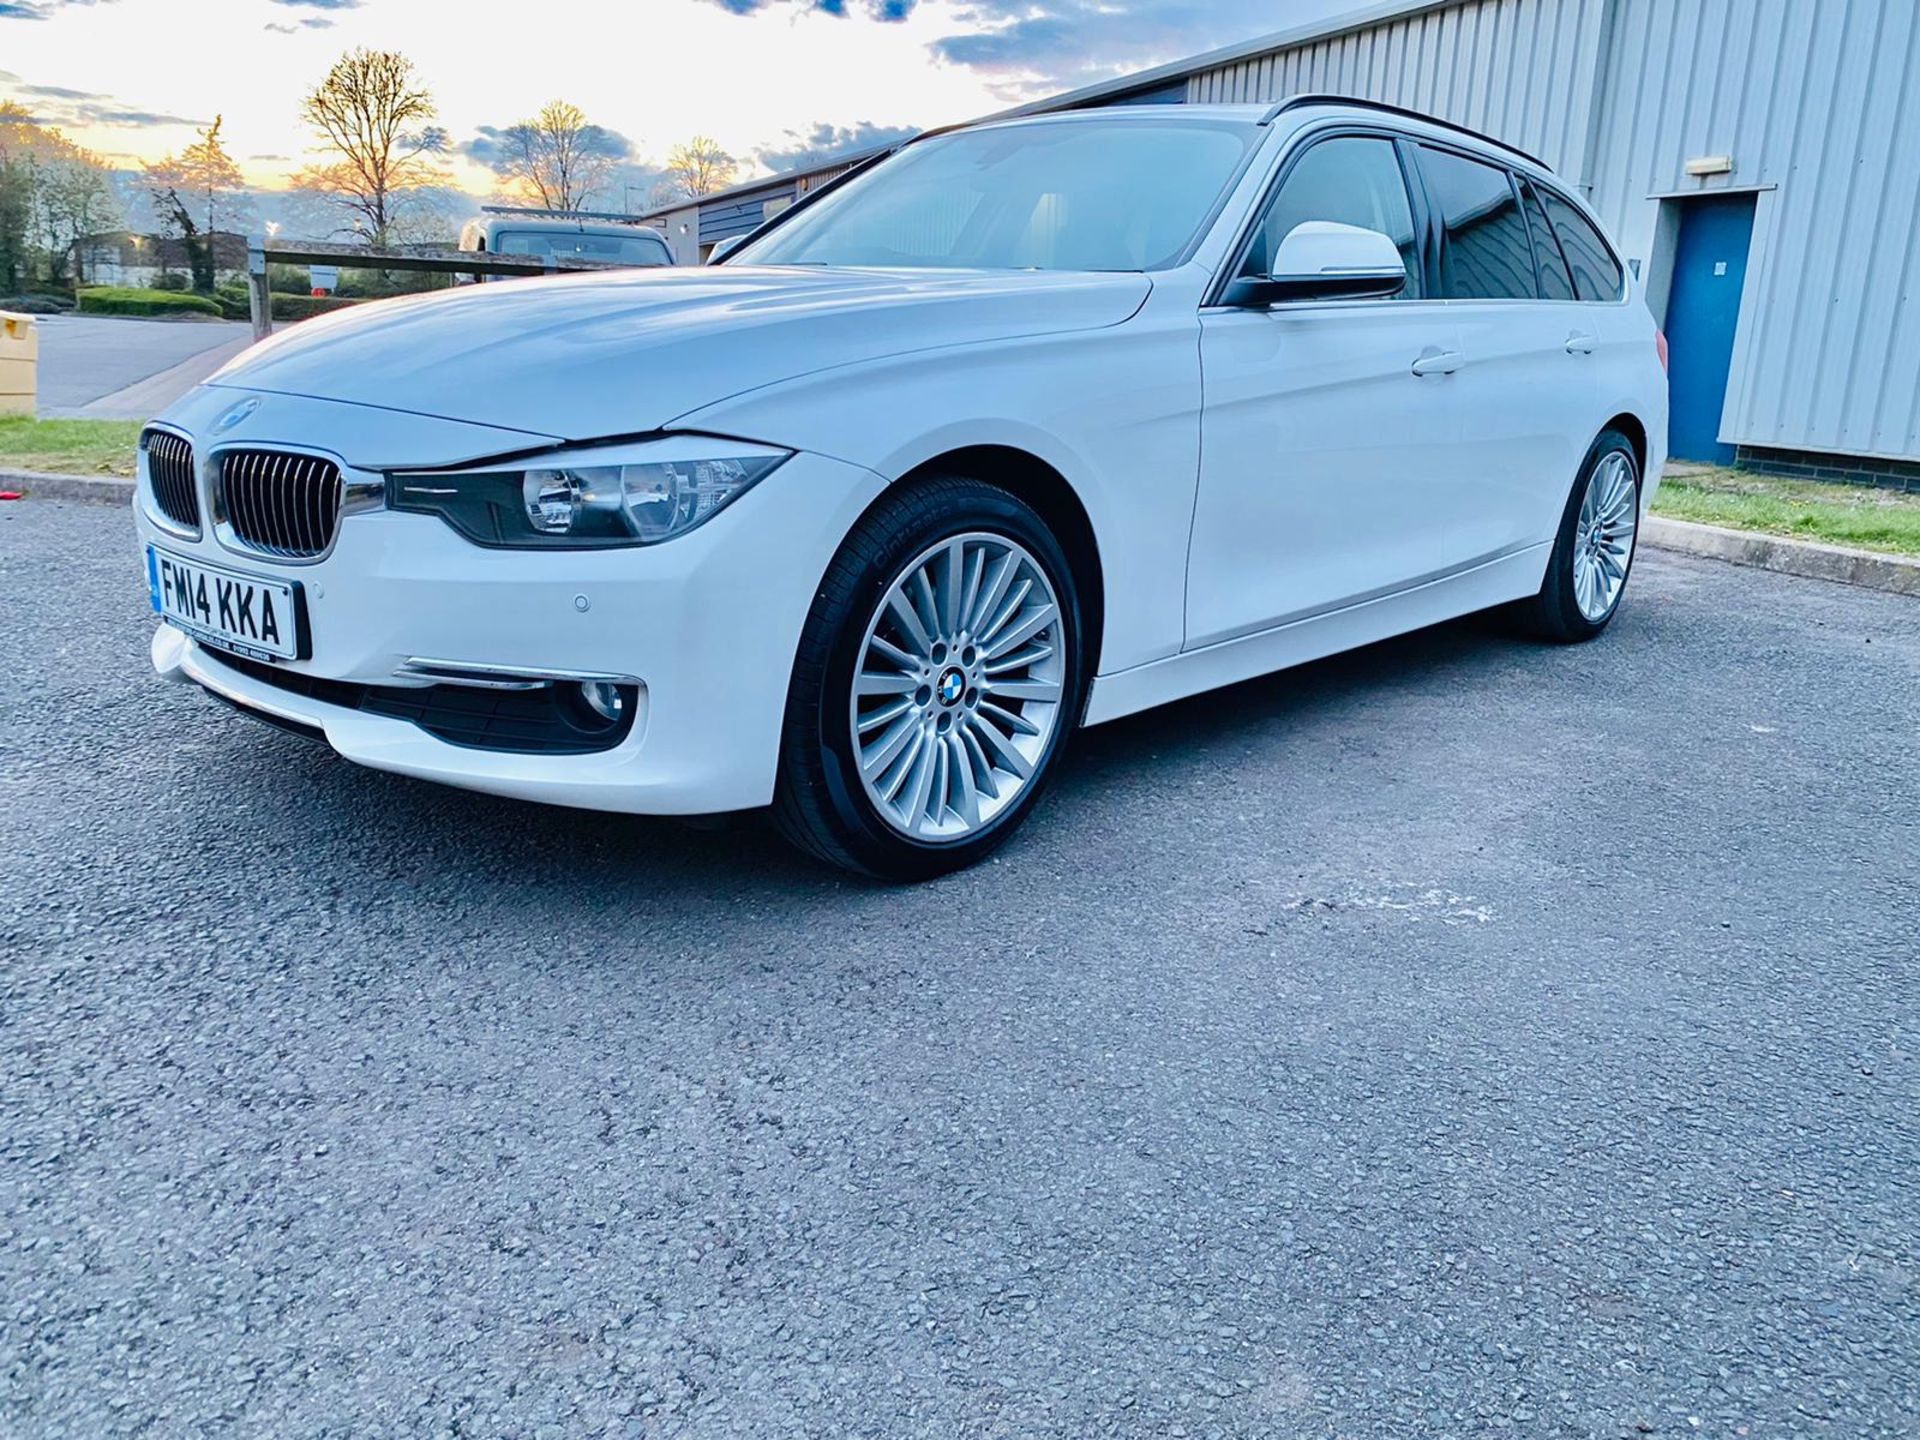 2014 BMW 320D LUXURY TOURING AUTO, 2.0 DIESEL ENGINE, SHOWING 3 PREVIOUS KEEPERS *NO VAT* - Image 2 of 11